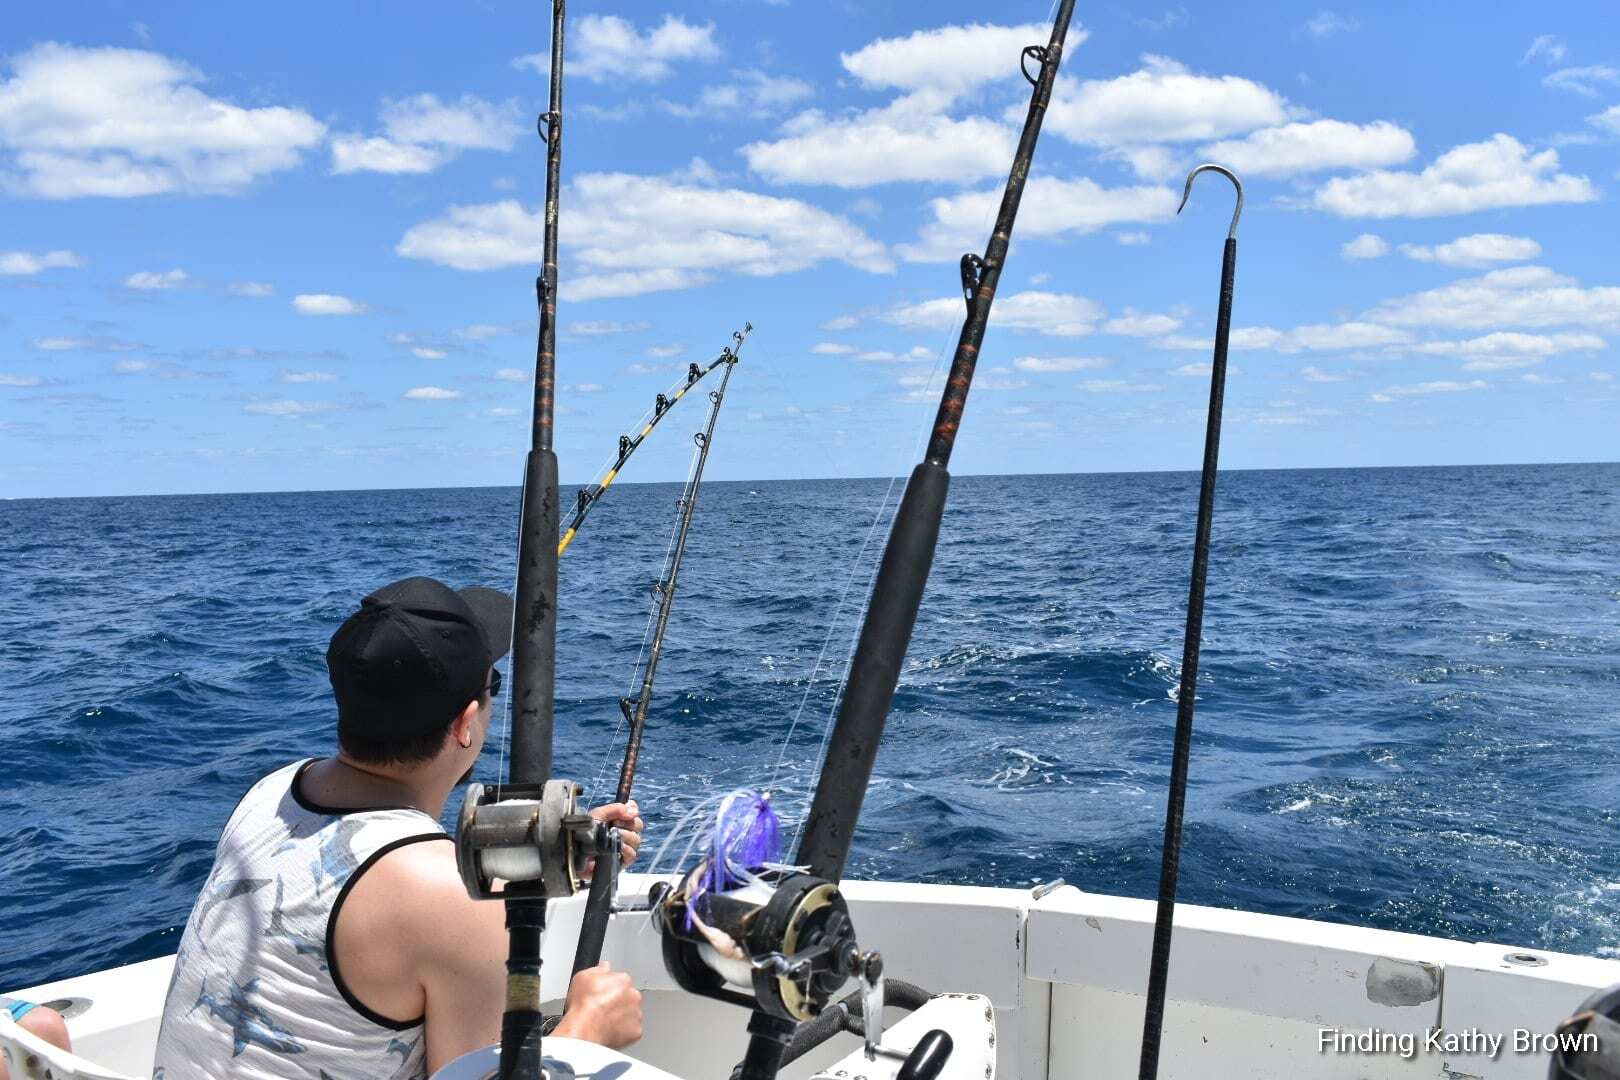 "Michael Denton excitedly reels in a big catch off the back of the BOLO charter fishing boat on a sunny day in South Florida"